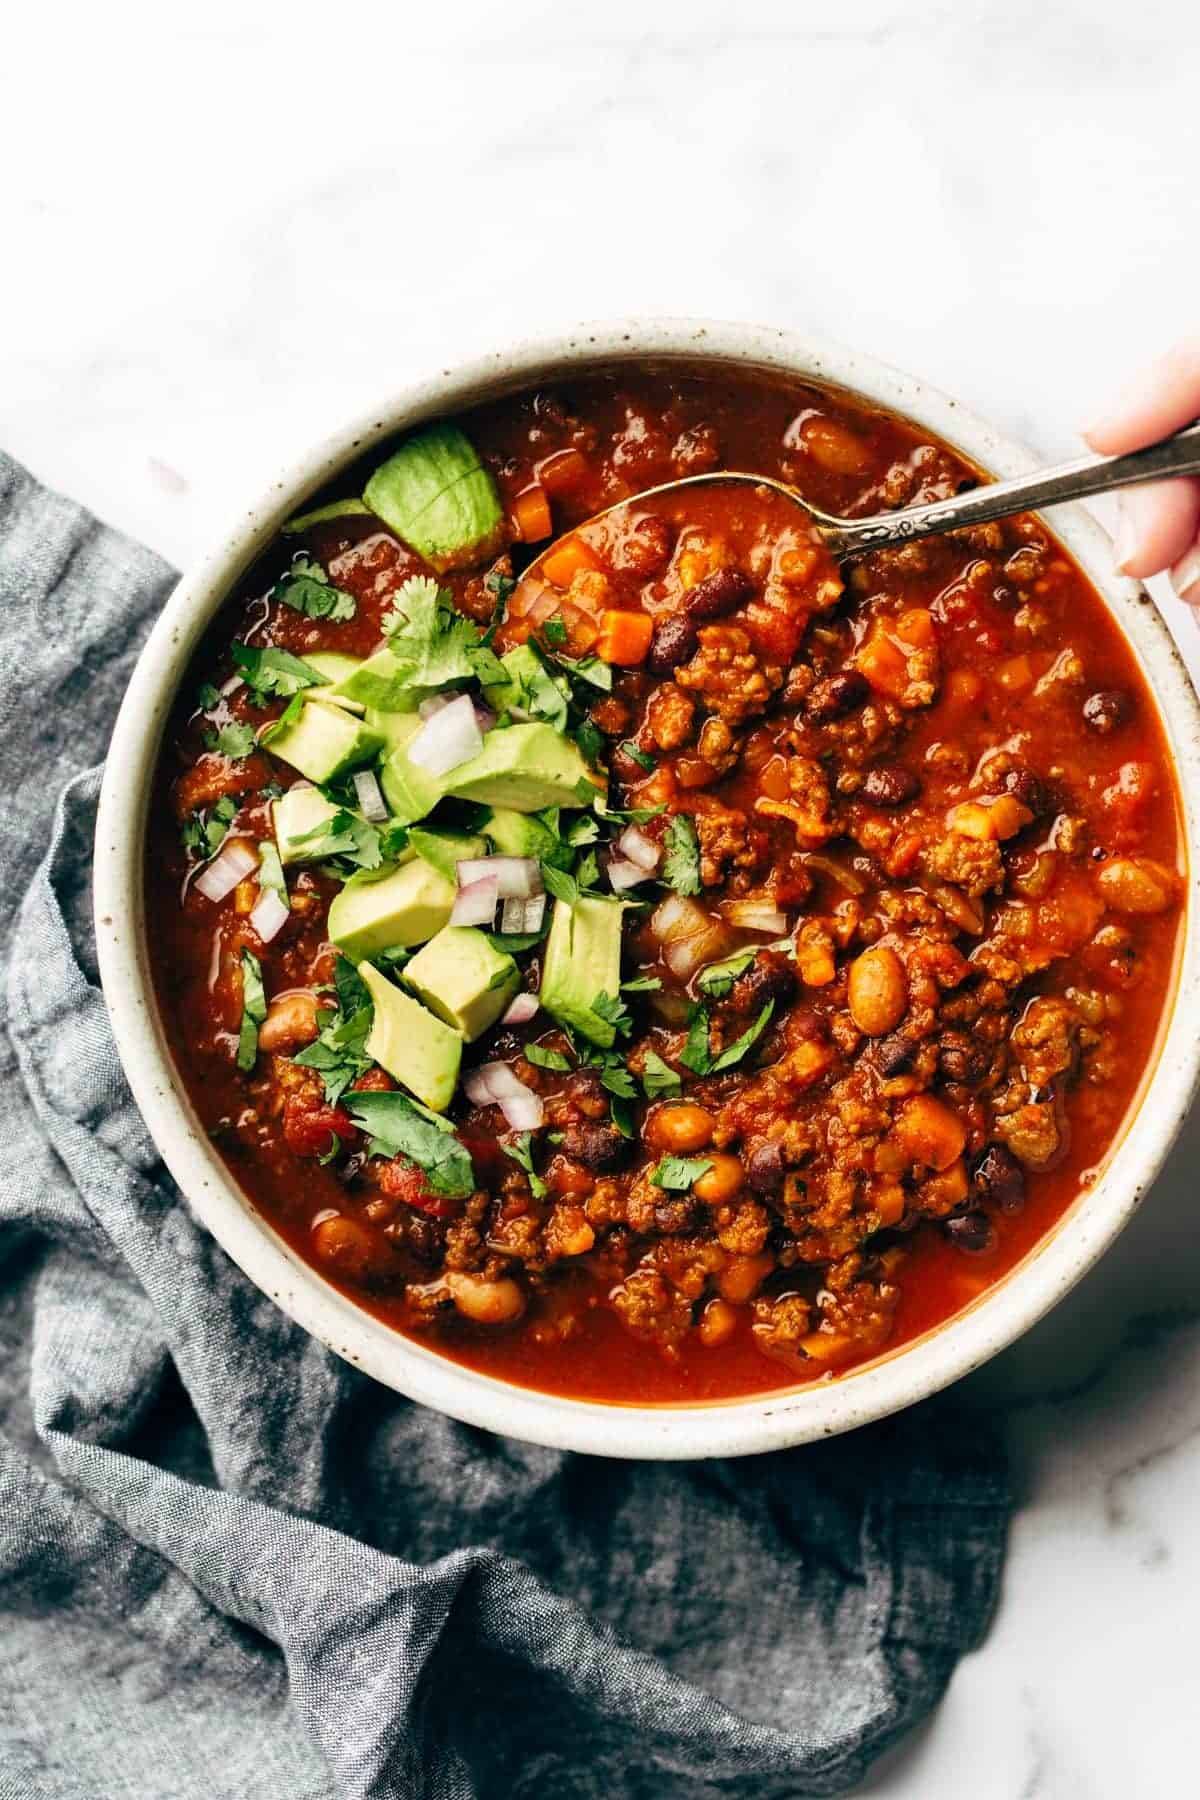 Sunday chili in a bowl with a spoon.